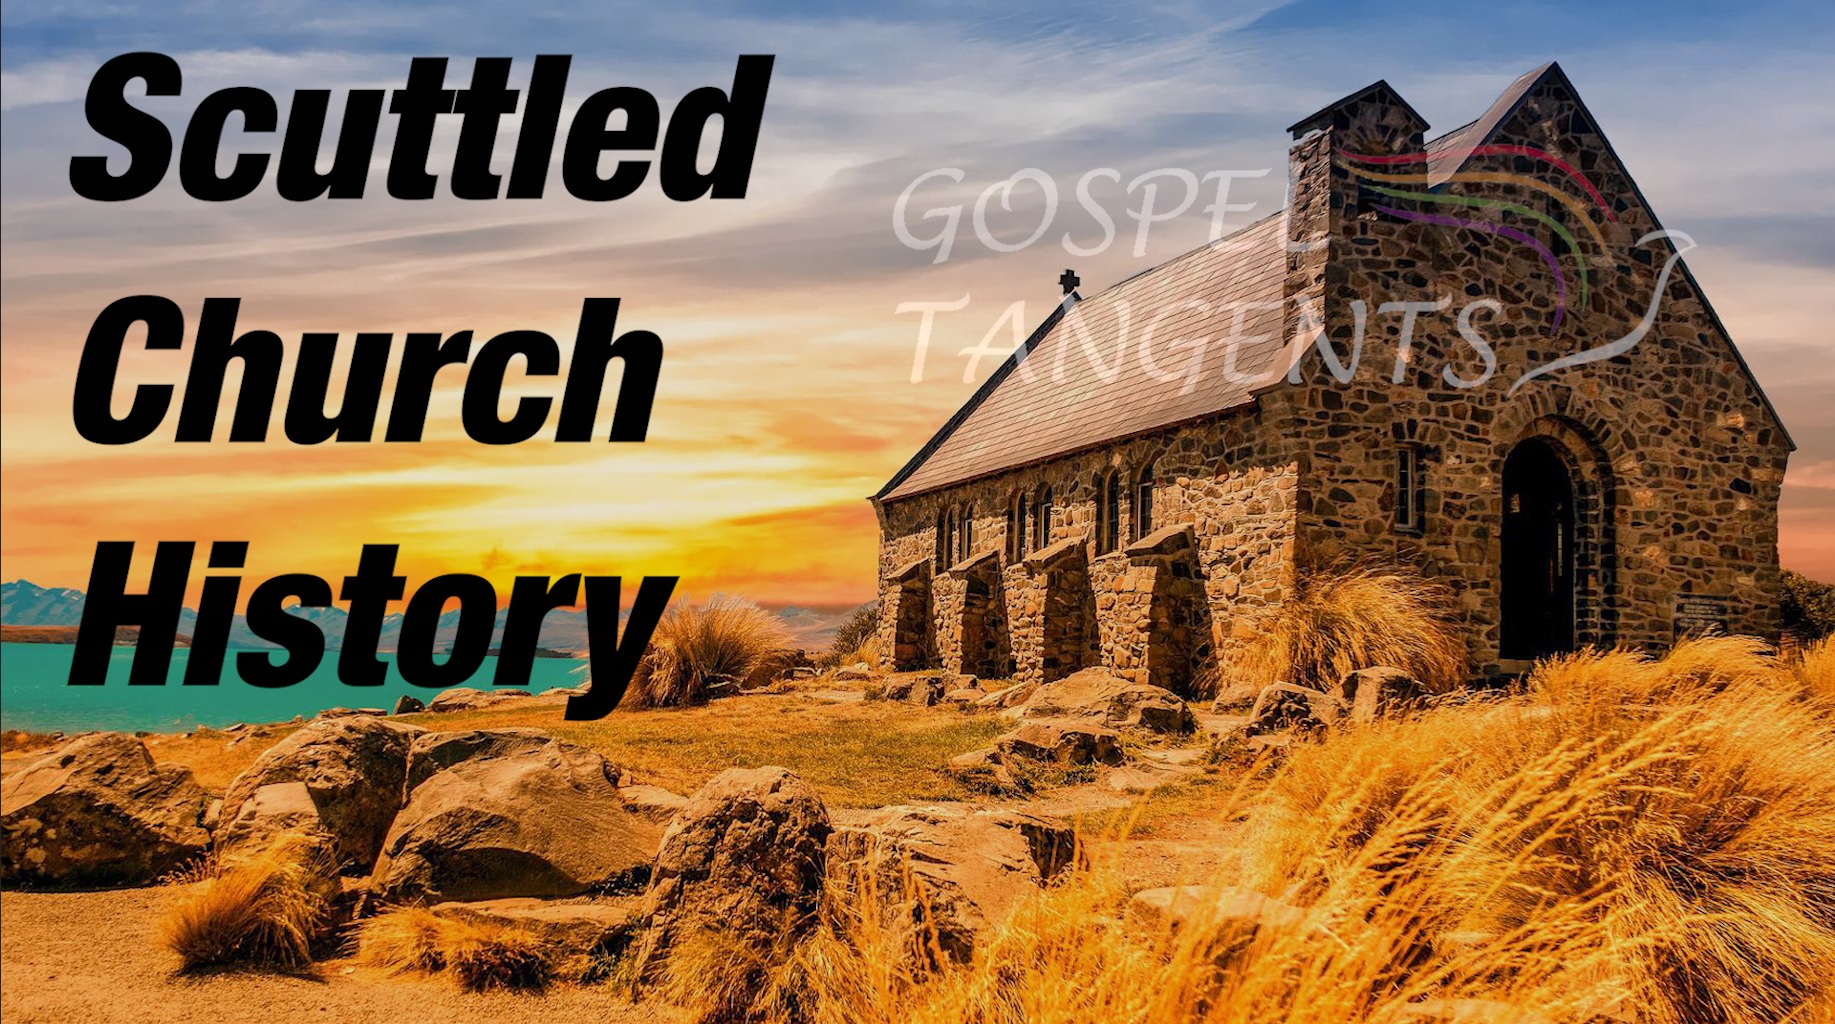 Dr. Richard Bushman discusses the 1970s scuttled church history project by the Church.